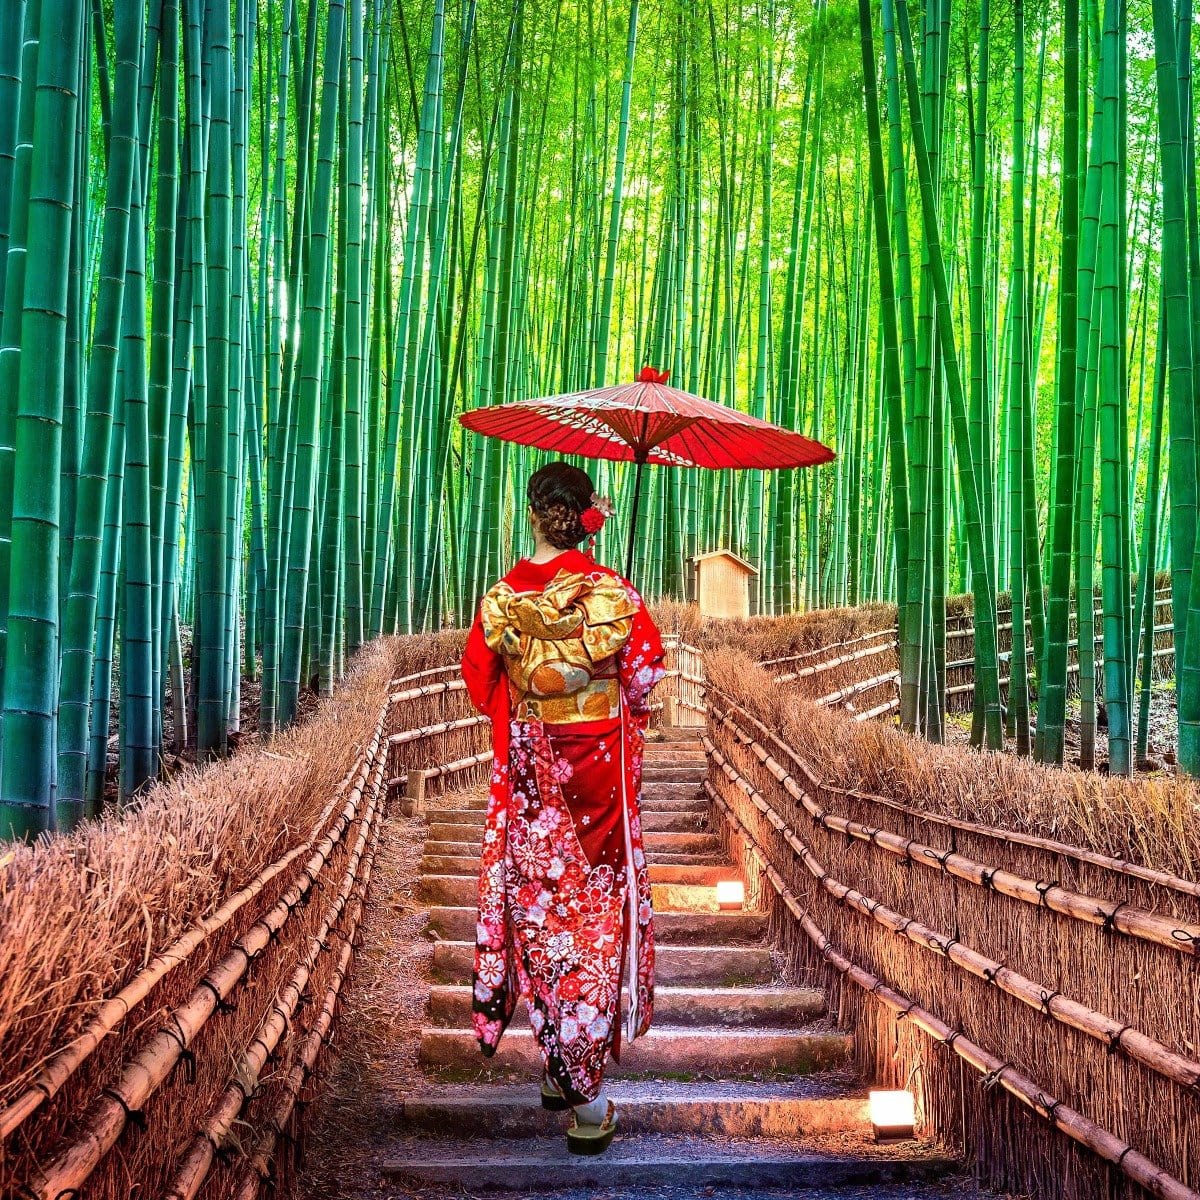 A person wearing a traditional red and gold kimono and holding a red umbrella walks along a pathway lined with bamboo on both sides. The scene is vibrant and serene, much like the calming experience of enjoying Kansai-Kyoto Ceremonial Matcha by Magic Hour, with lush green bamboo towering above.